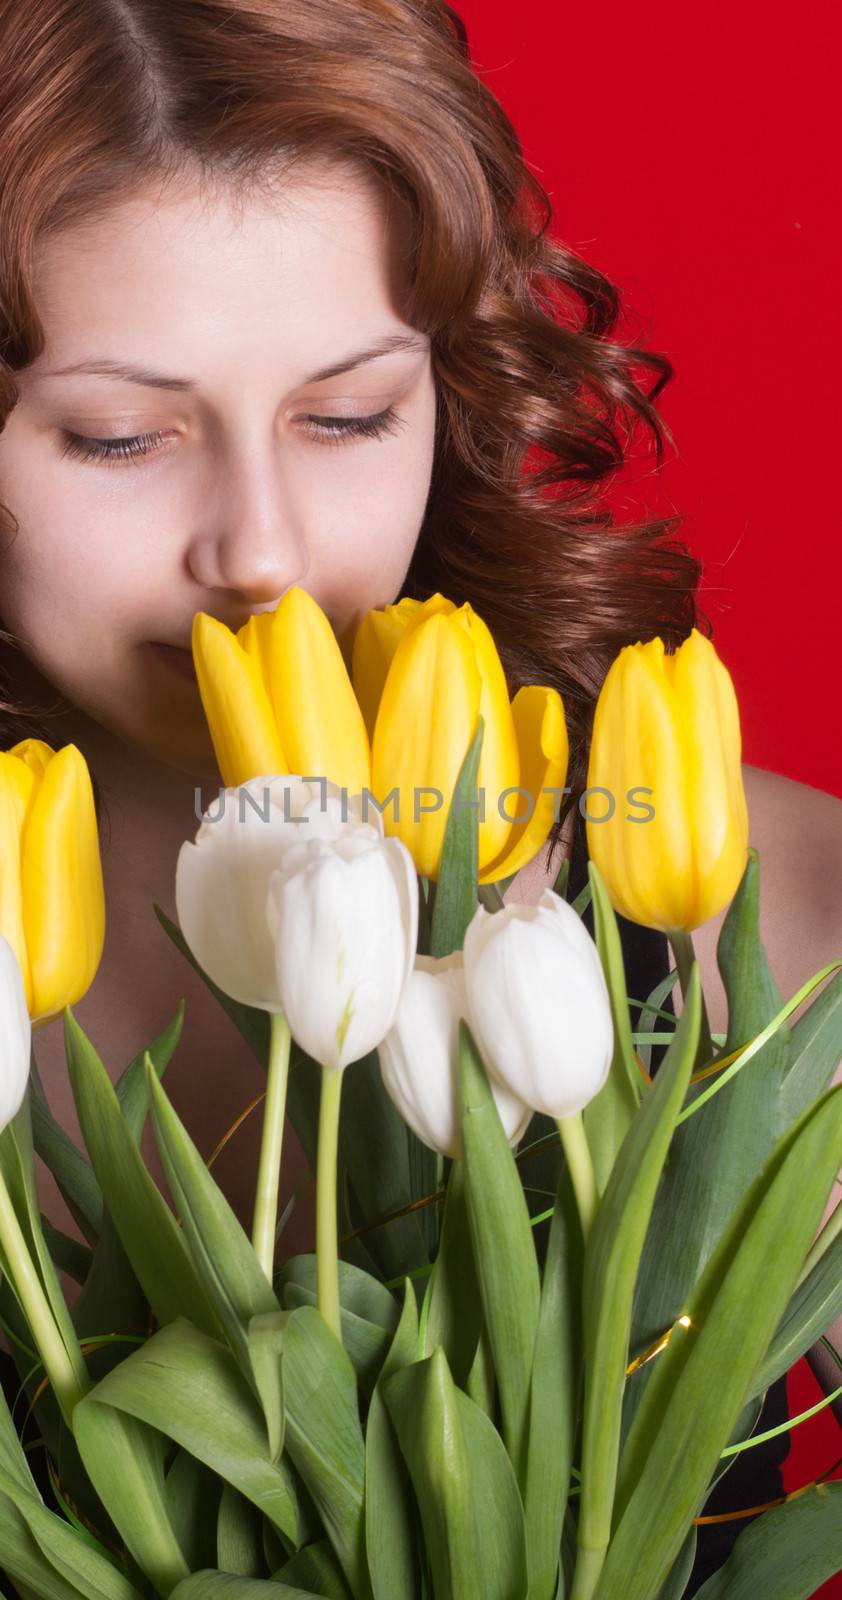 girl with a bouquet of tulips on red background by gurin_oleksandr